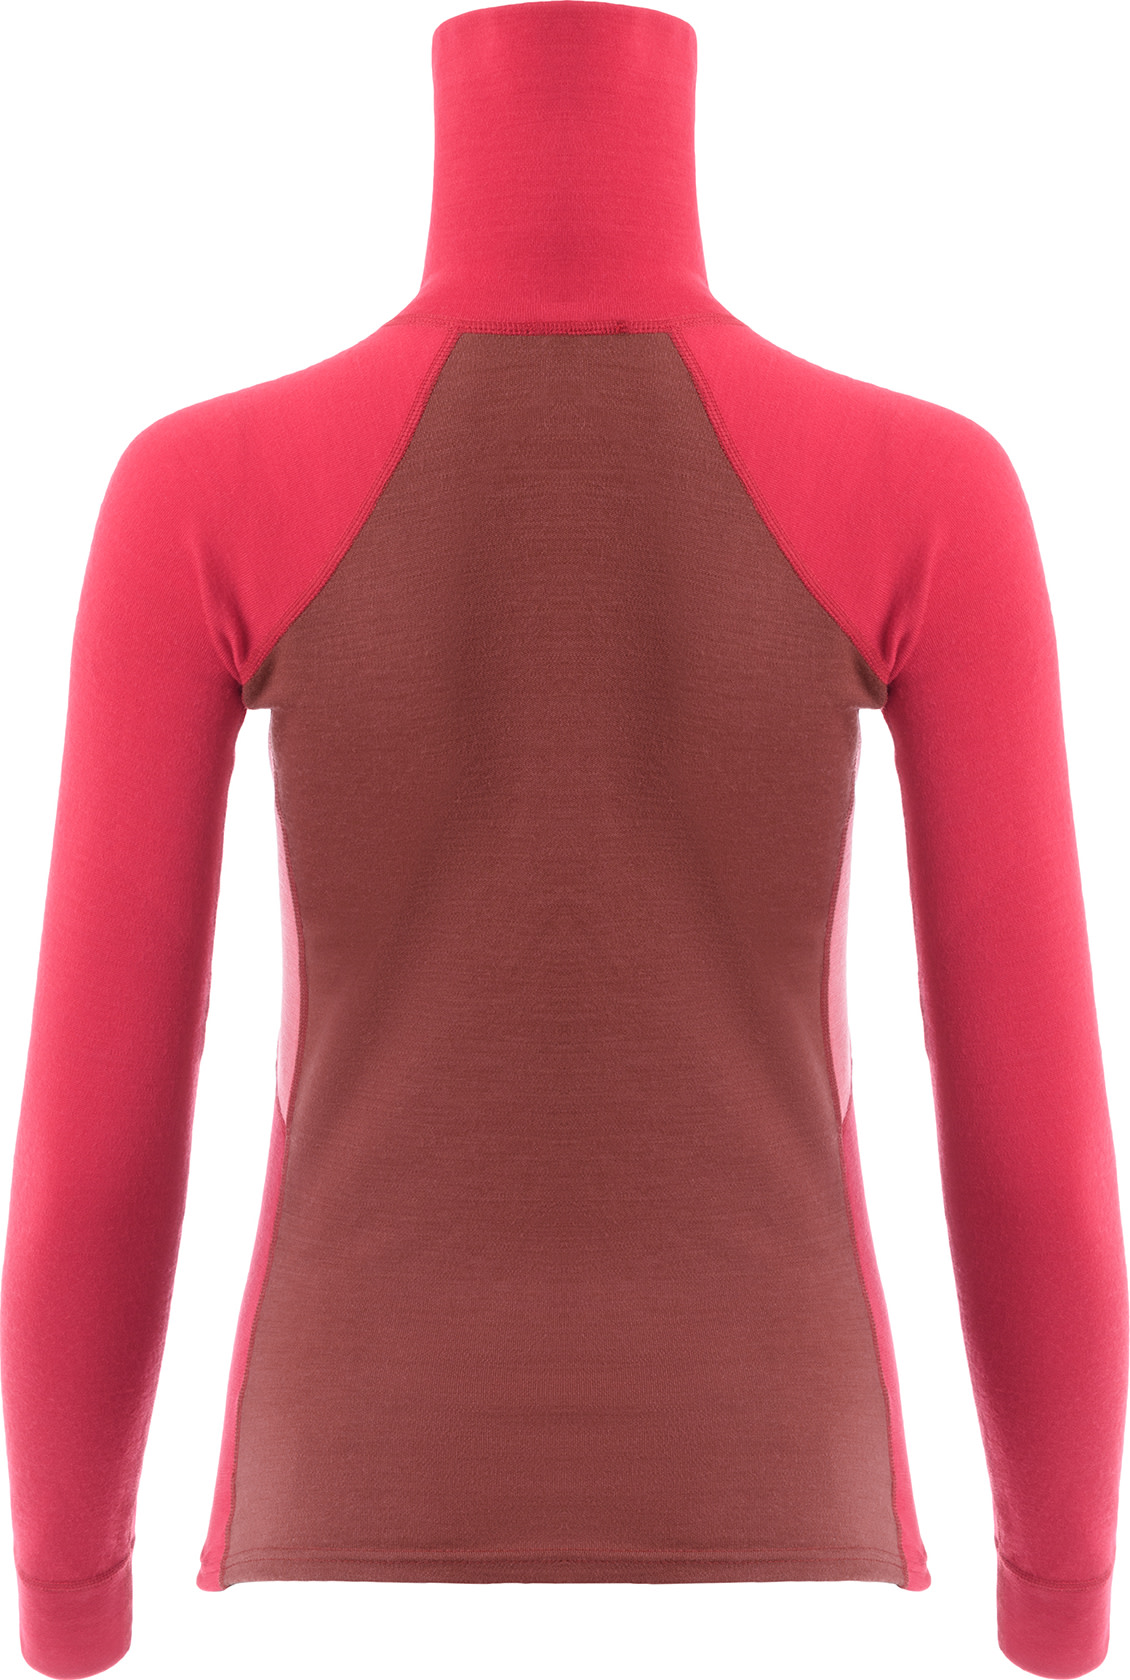 Aclima Women’s WarmWool Polo Jester Red/Spiced Apple/Spiced Coral